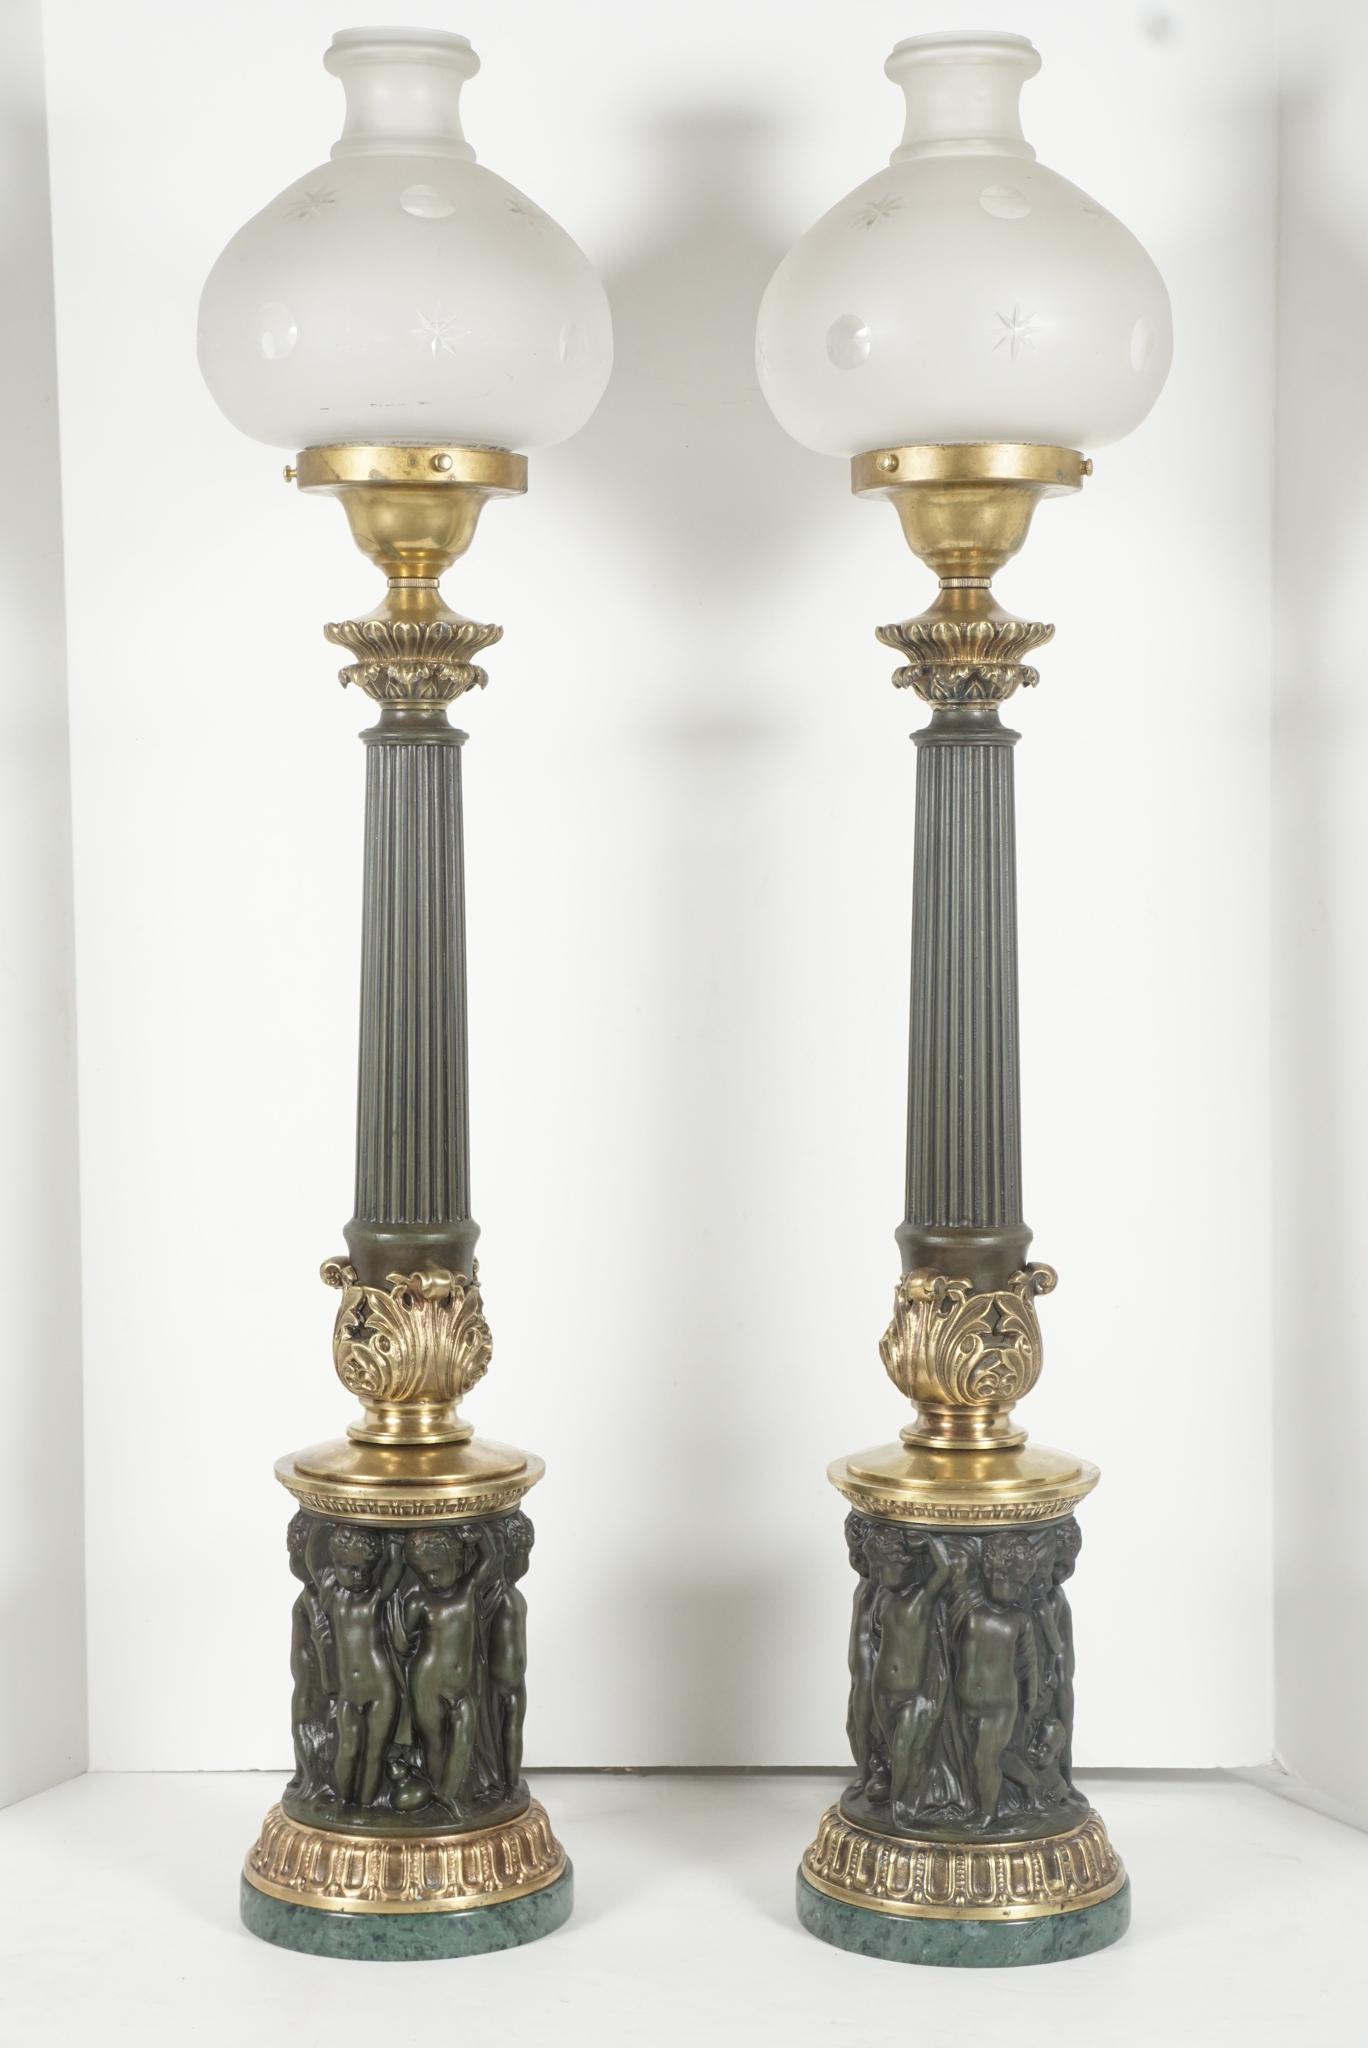 This pair of very dramatic tall cast & tole neoclassical sinumbra style lamps with frosted etched glass shades appear to be antique from the 1820s however are made circa 1930. Cast in heavy brass and tole painted they are most probably European in